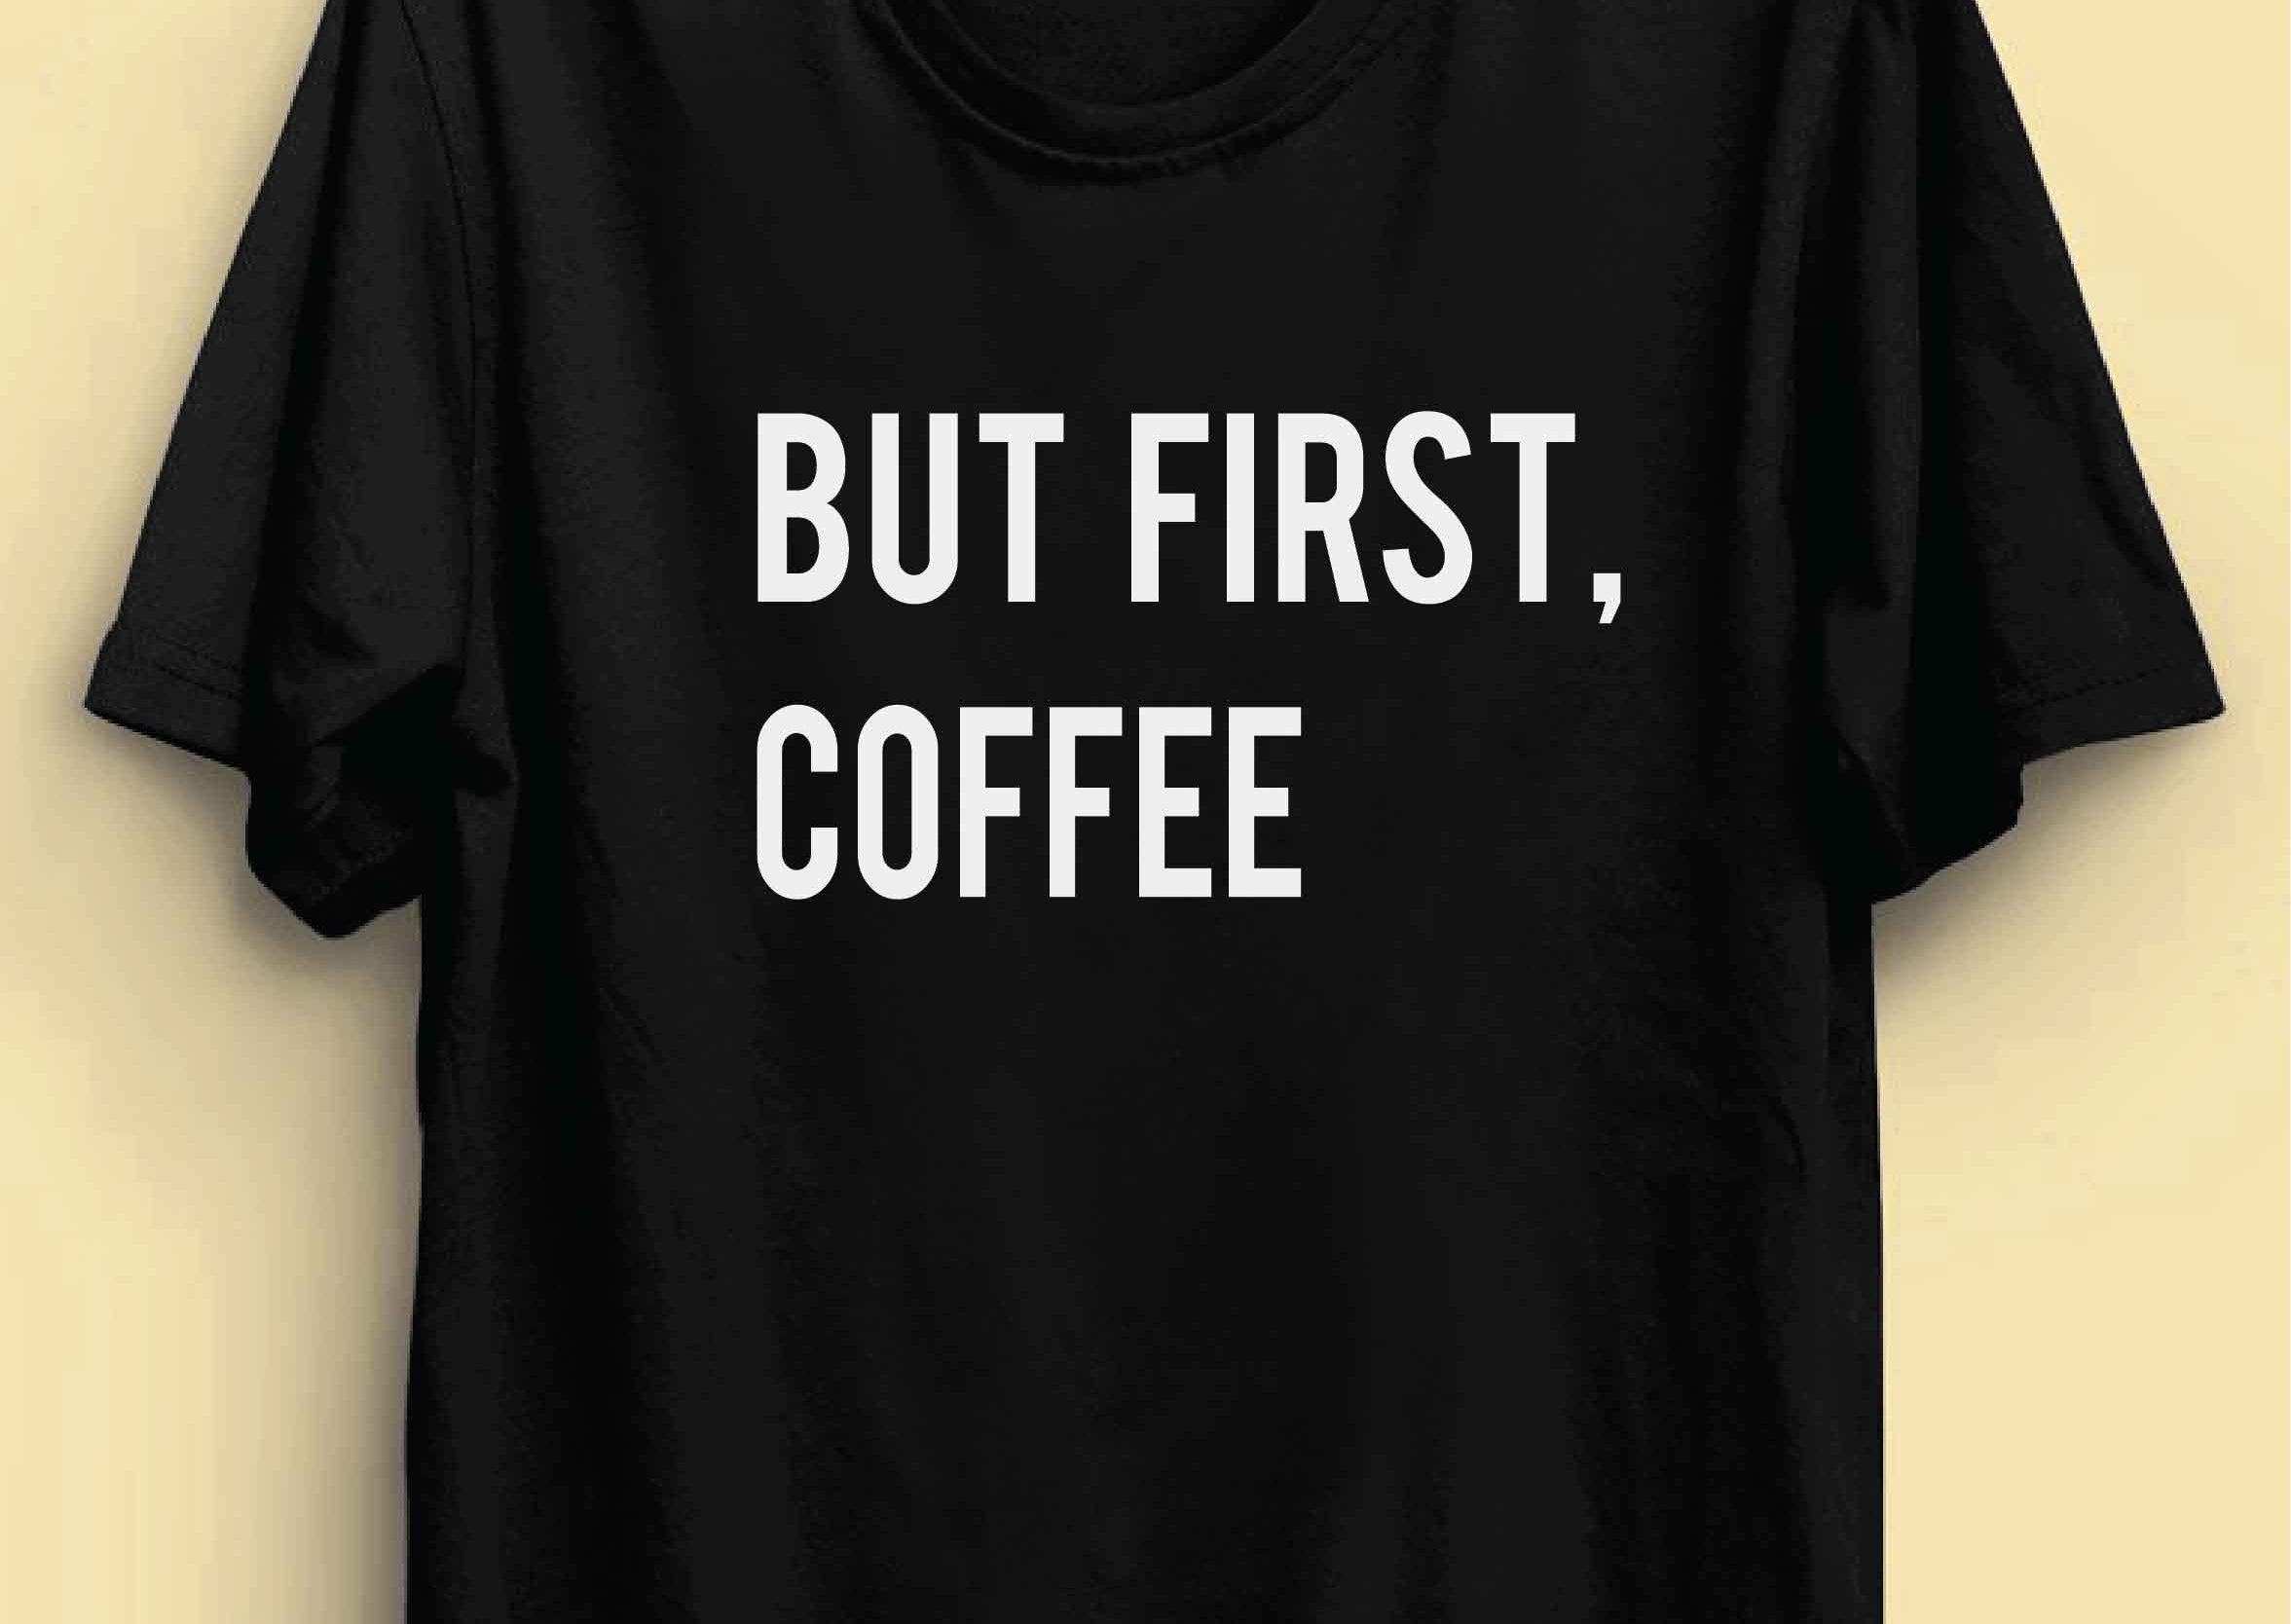 But First Coffee Reactr Tshirts For Men - Eyewearlabs